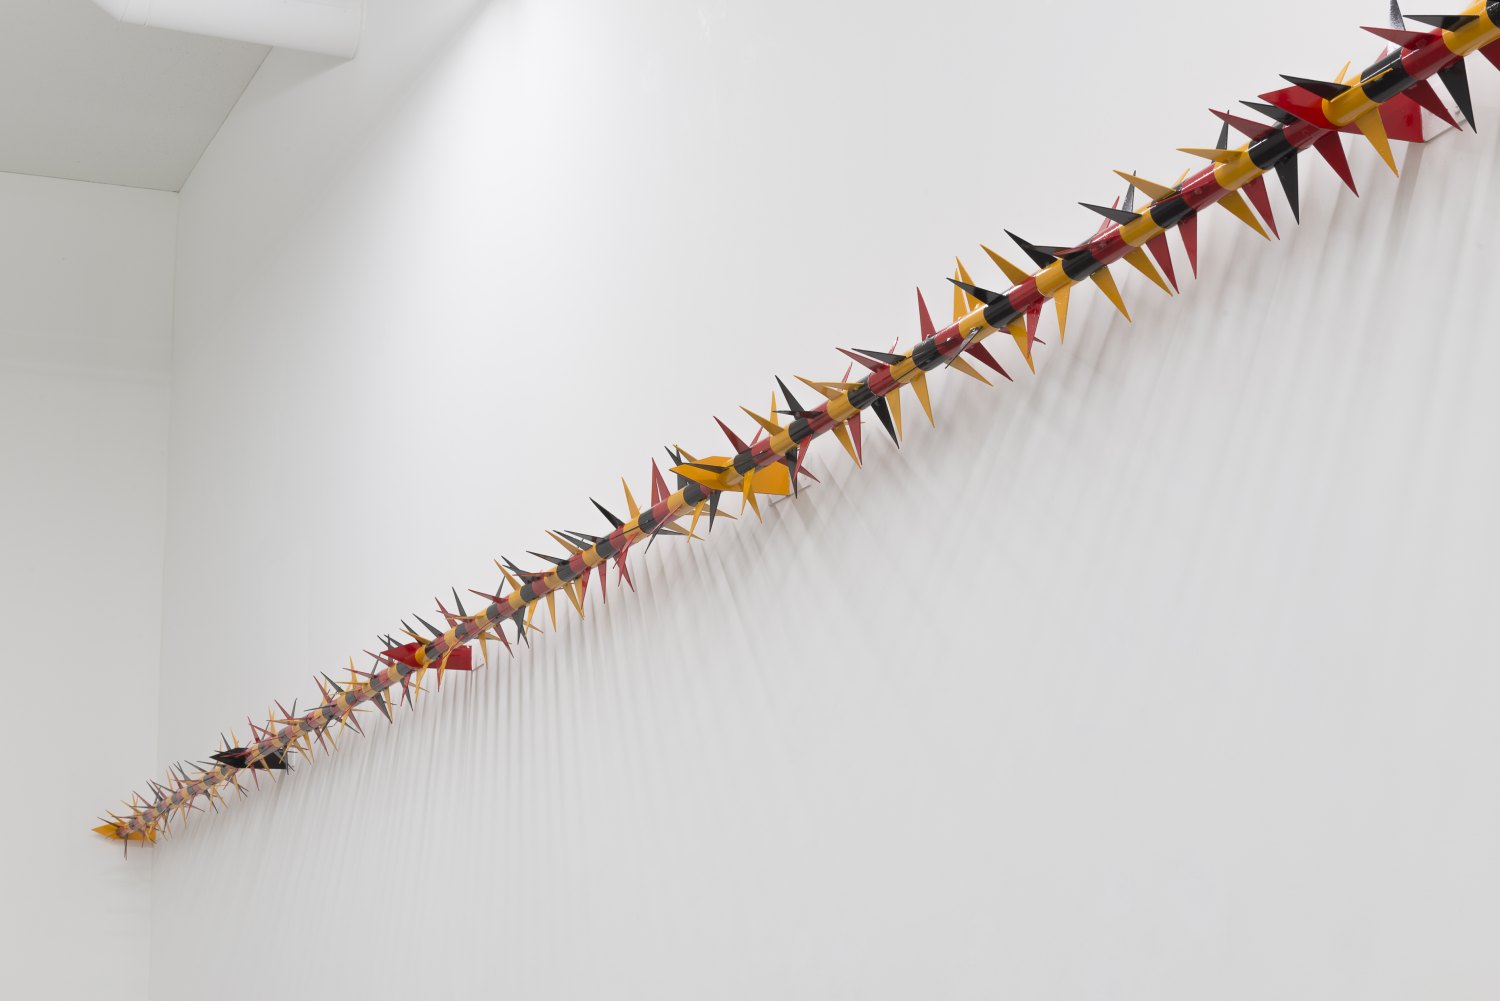 Claire Fontaine Untitled (Rotary spike: Schwarz-Rot-Gelb, Schwarz-Rot-Senf, Schwarz-Rot-Scheiße), 2016 Galvanised and painted rotary spike, tubing and fixtures  72 elements, 25 x 600 x 25 cm  